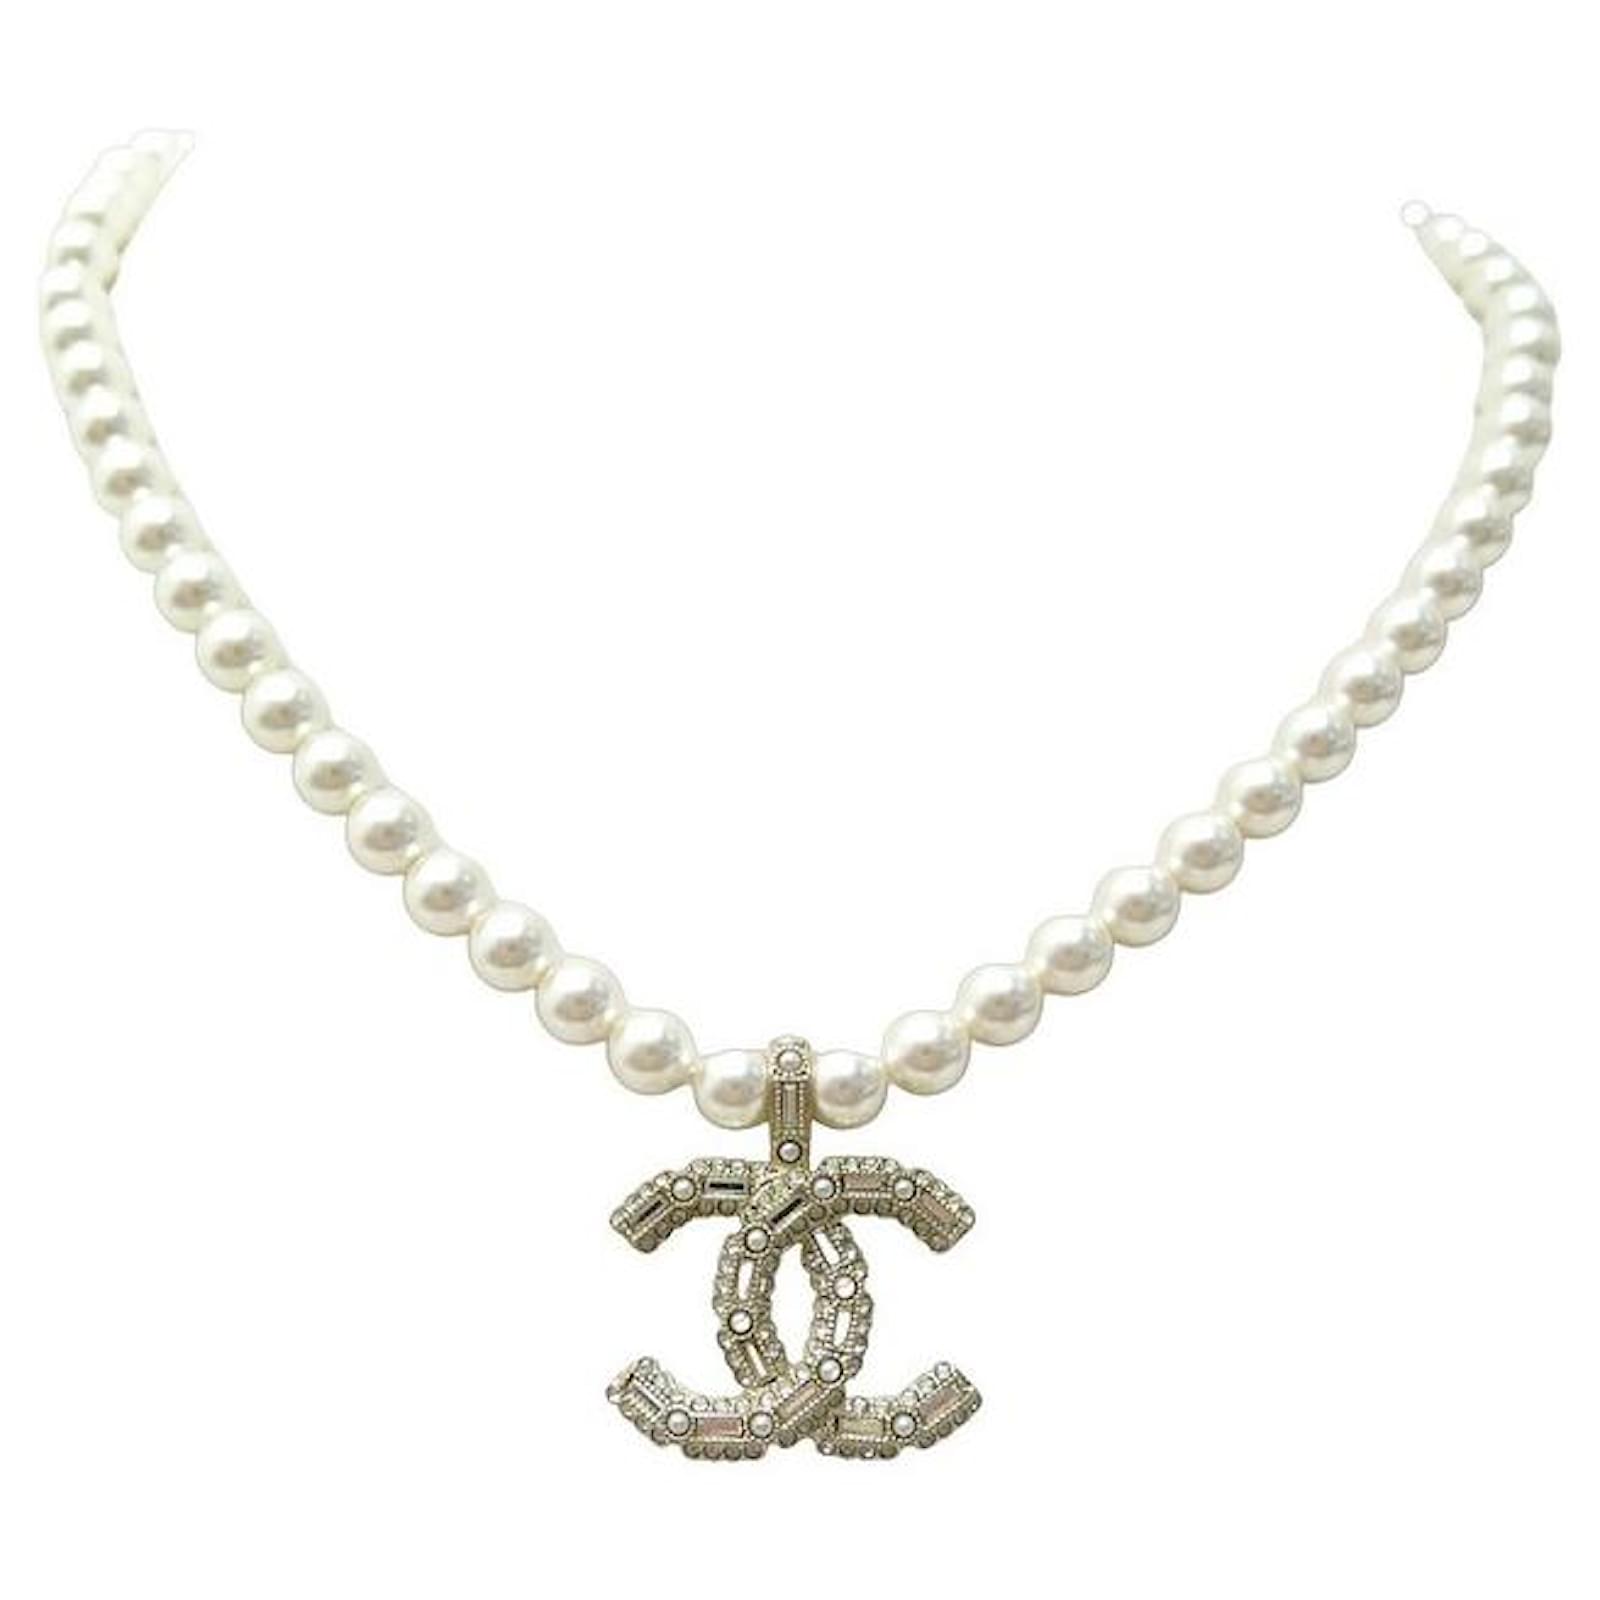 Necklaces Chanel New Chanel CC Logo Pearl Necklace 35/45 Gold Metal Pearls Necklace